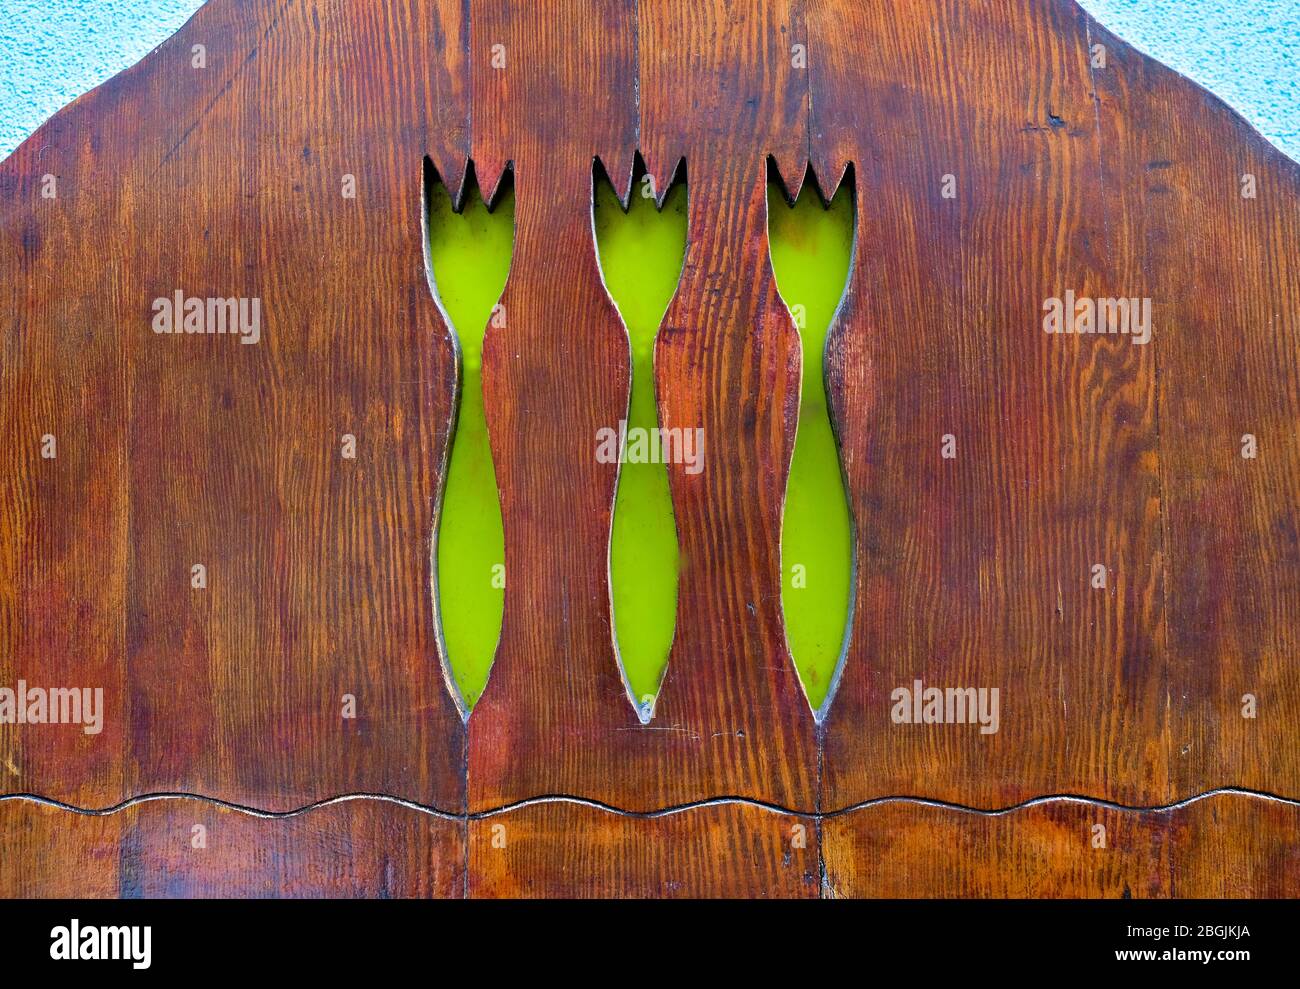 Three forks cutout in a wooden surface. Stock Photo